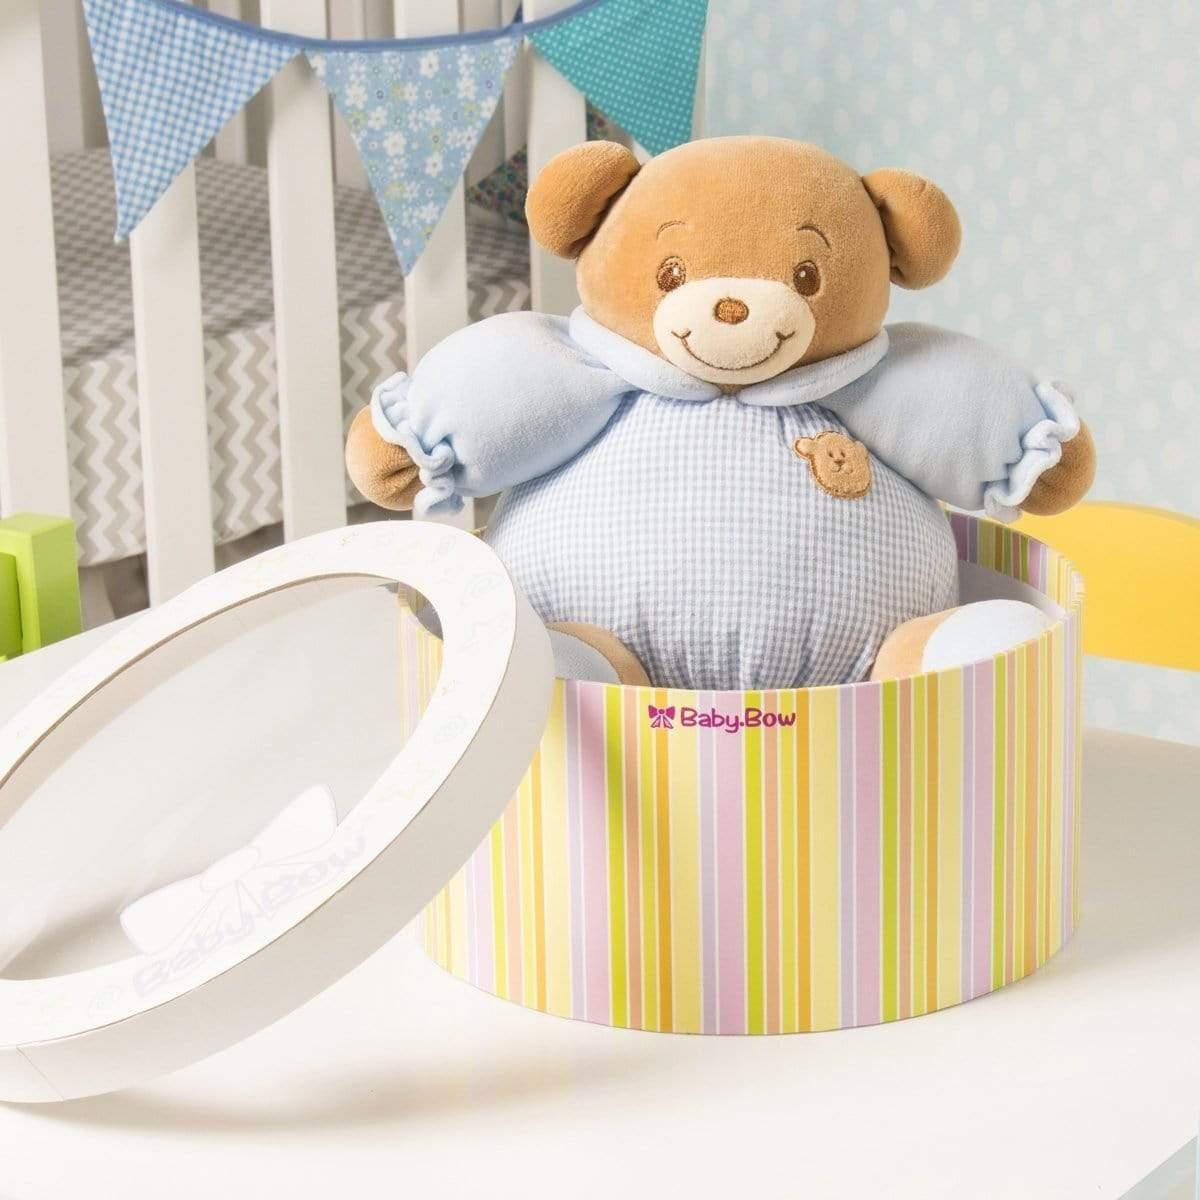 "Manny" the 8in Baby Bow Rattle Plush Teddy Bear in Blue by Russ Baby"